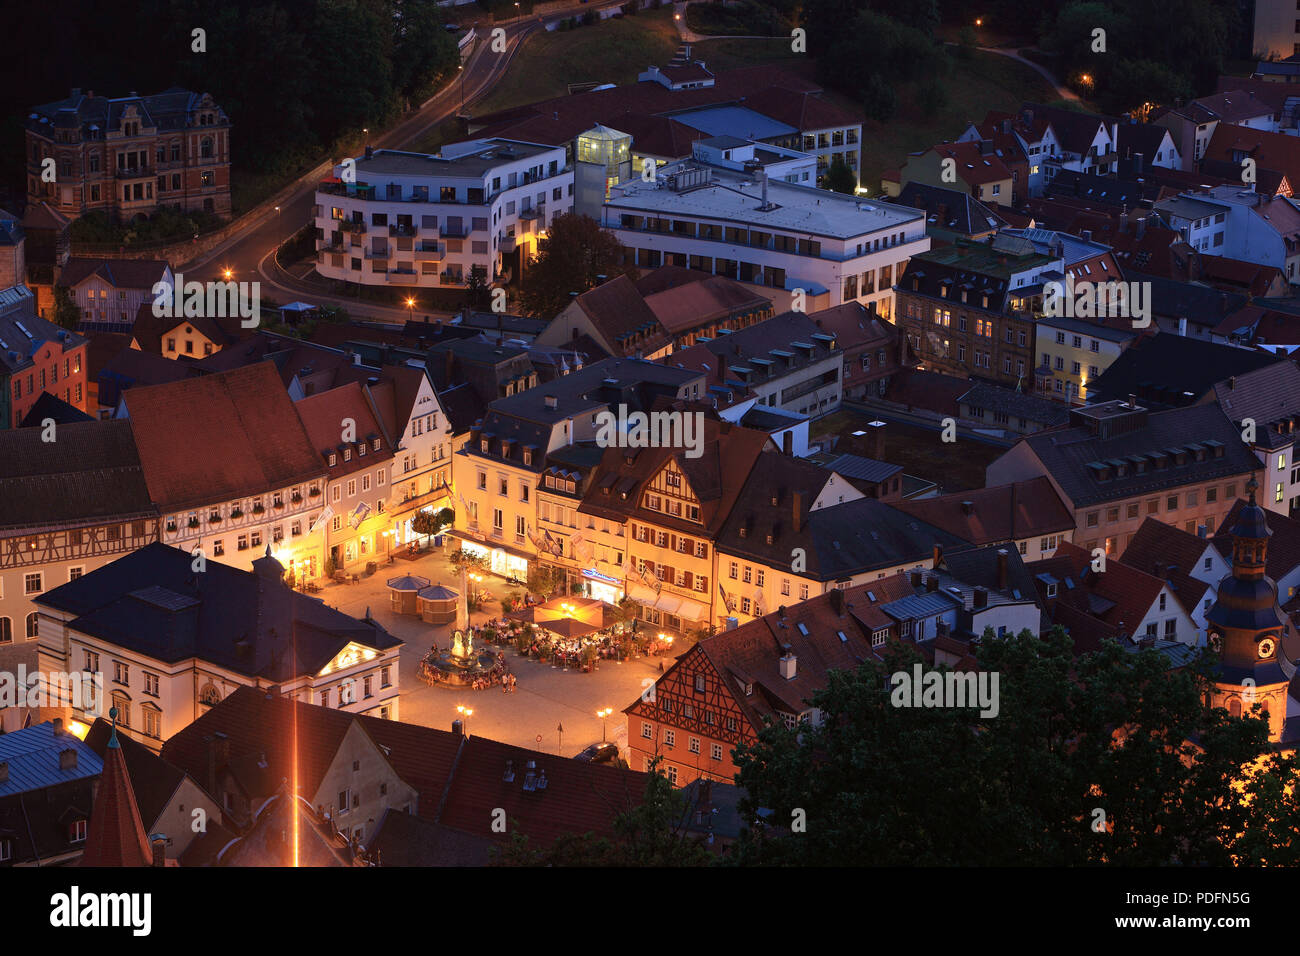 Market square in the evening, Kulmbach, Upper Franconia, Bavaria, Germany Stock Photo